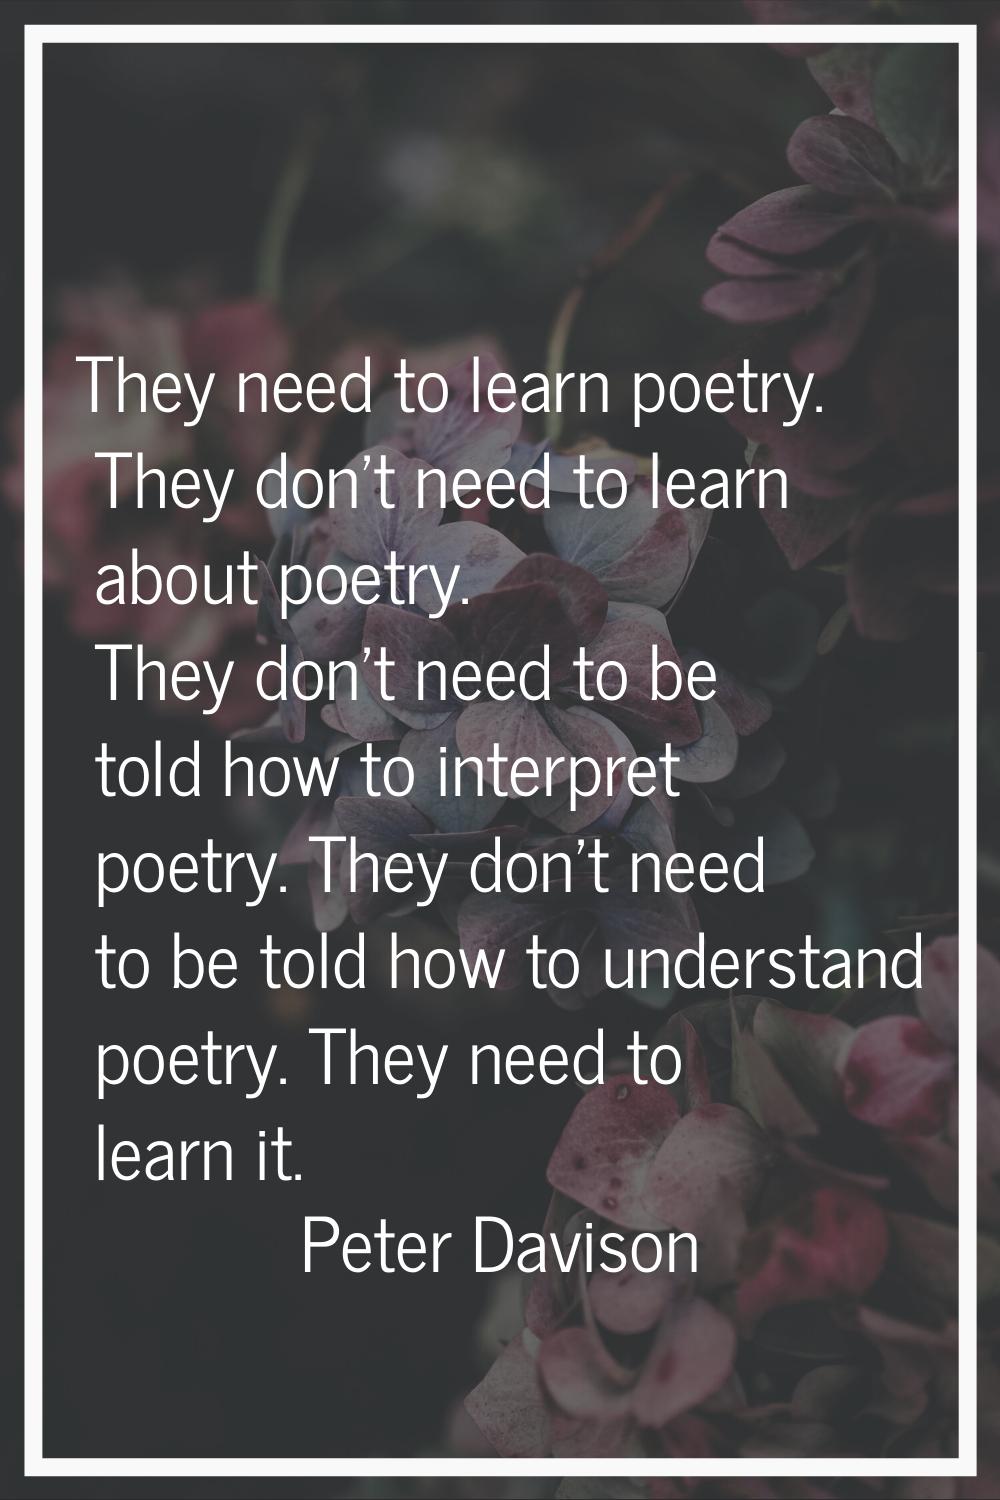 They need to learn poetry. They don't need to learn about poetry. They don't need to be told how to